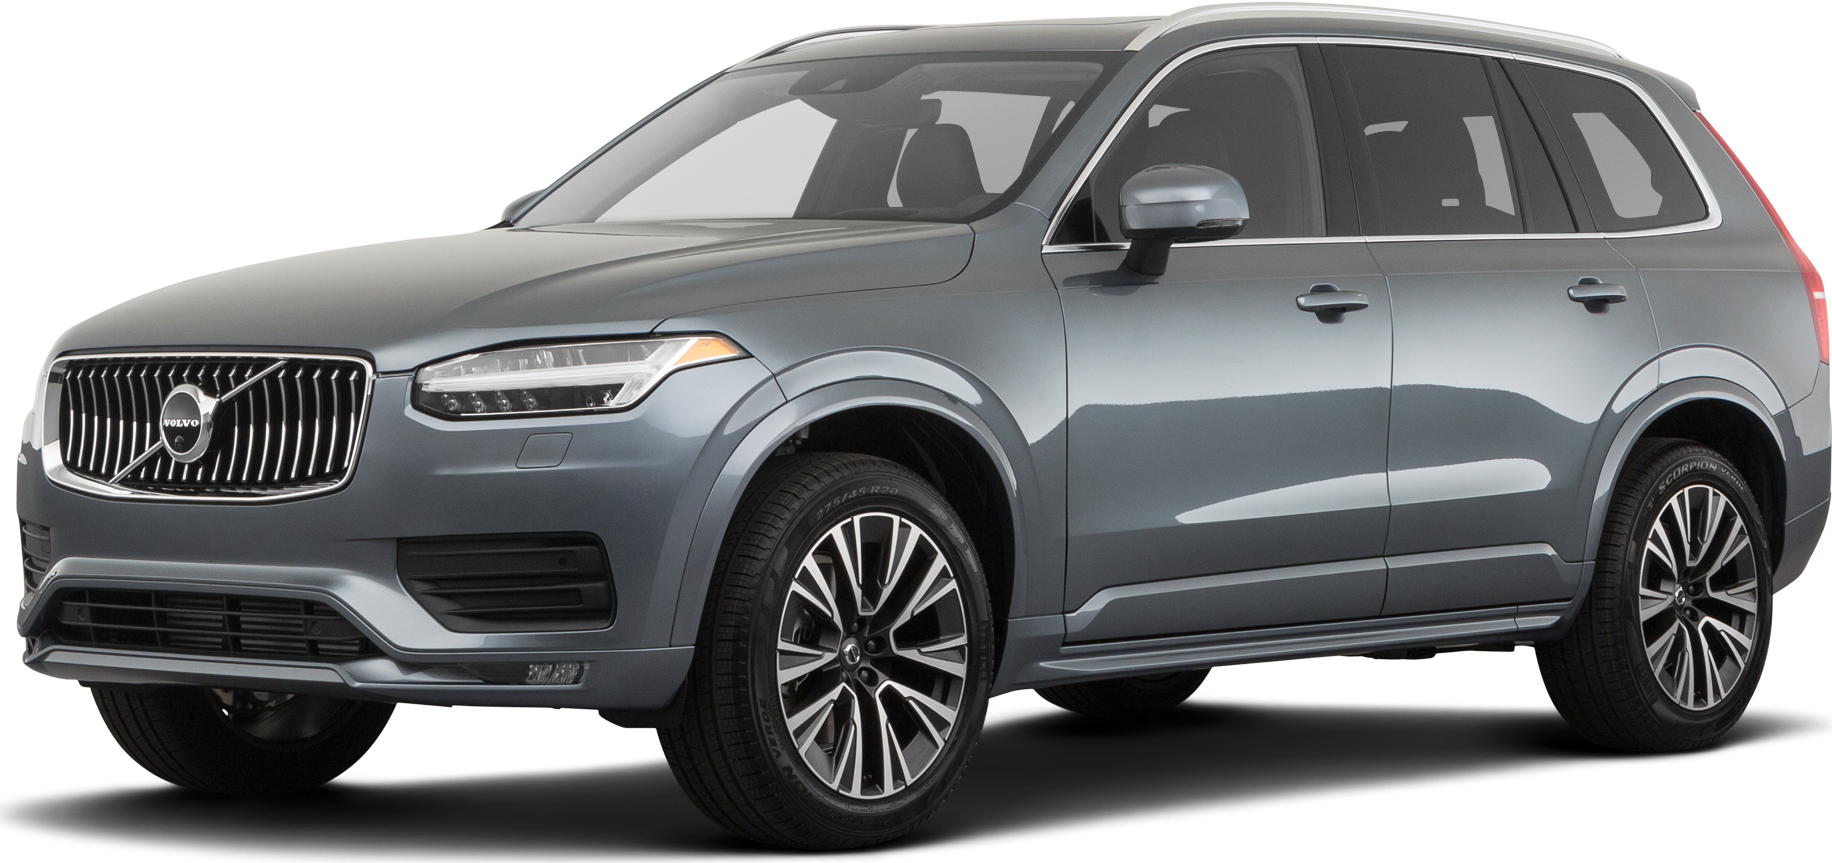 2020 Volvo XC90 Specs and Features